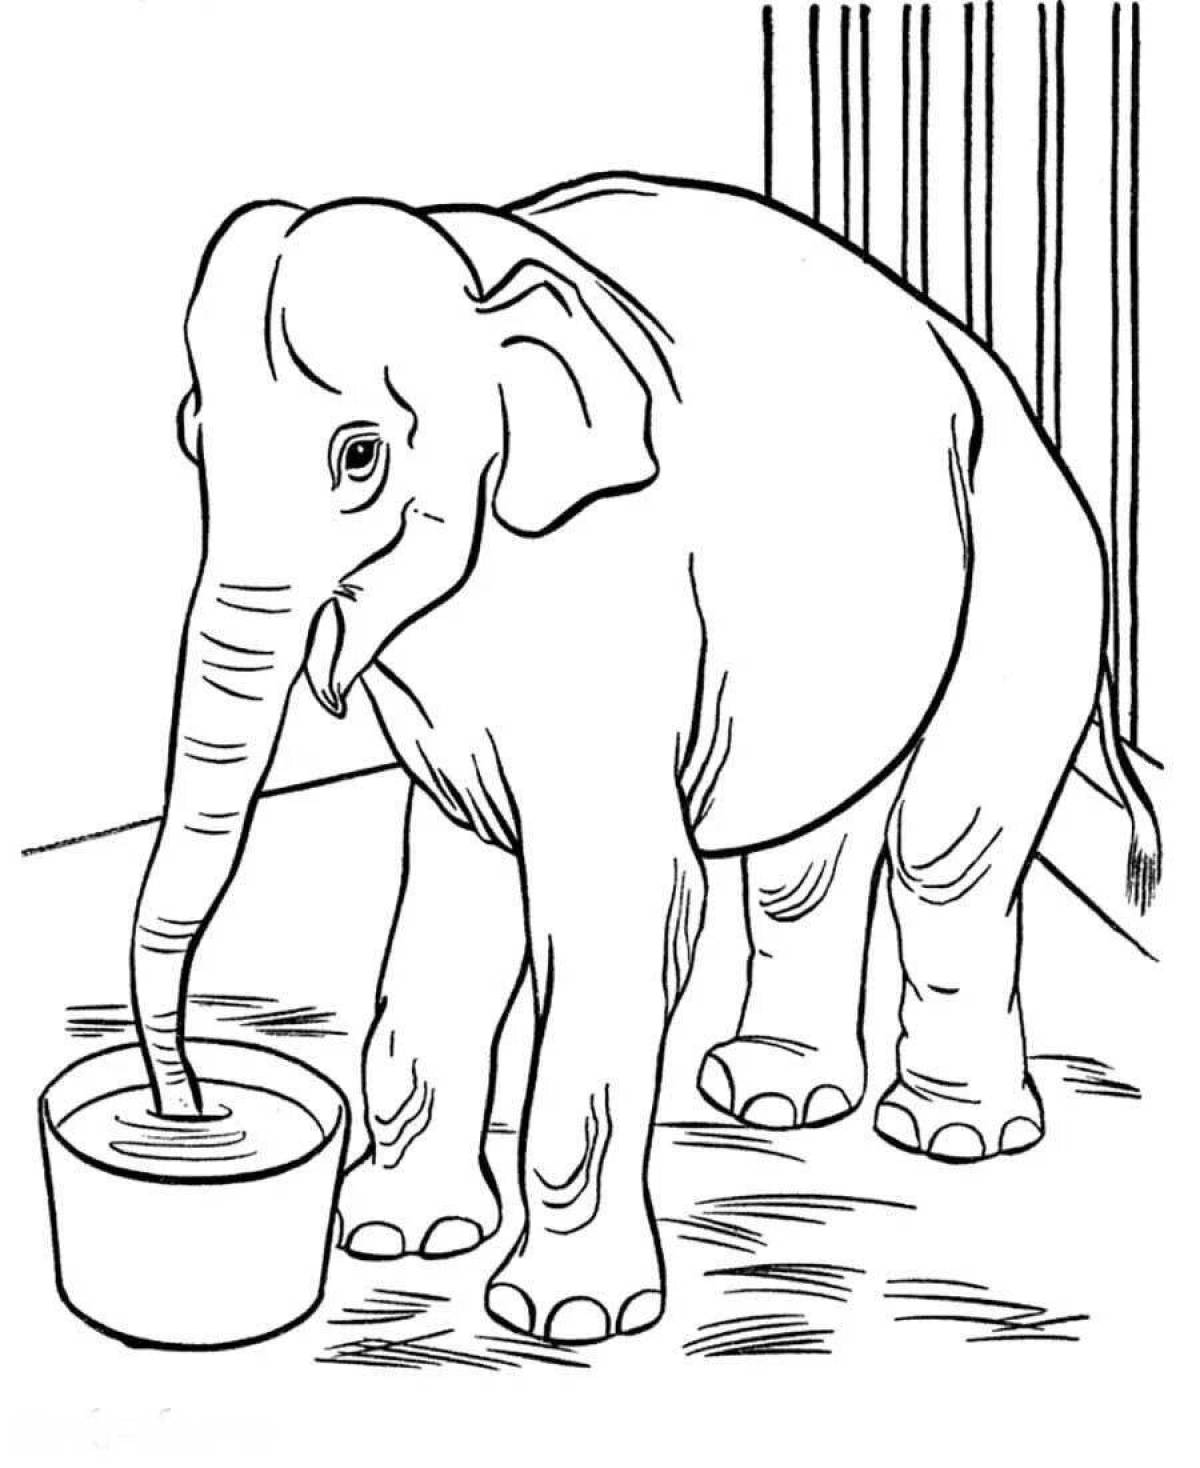 Adorable zoo coloring book for kids